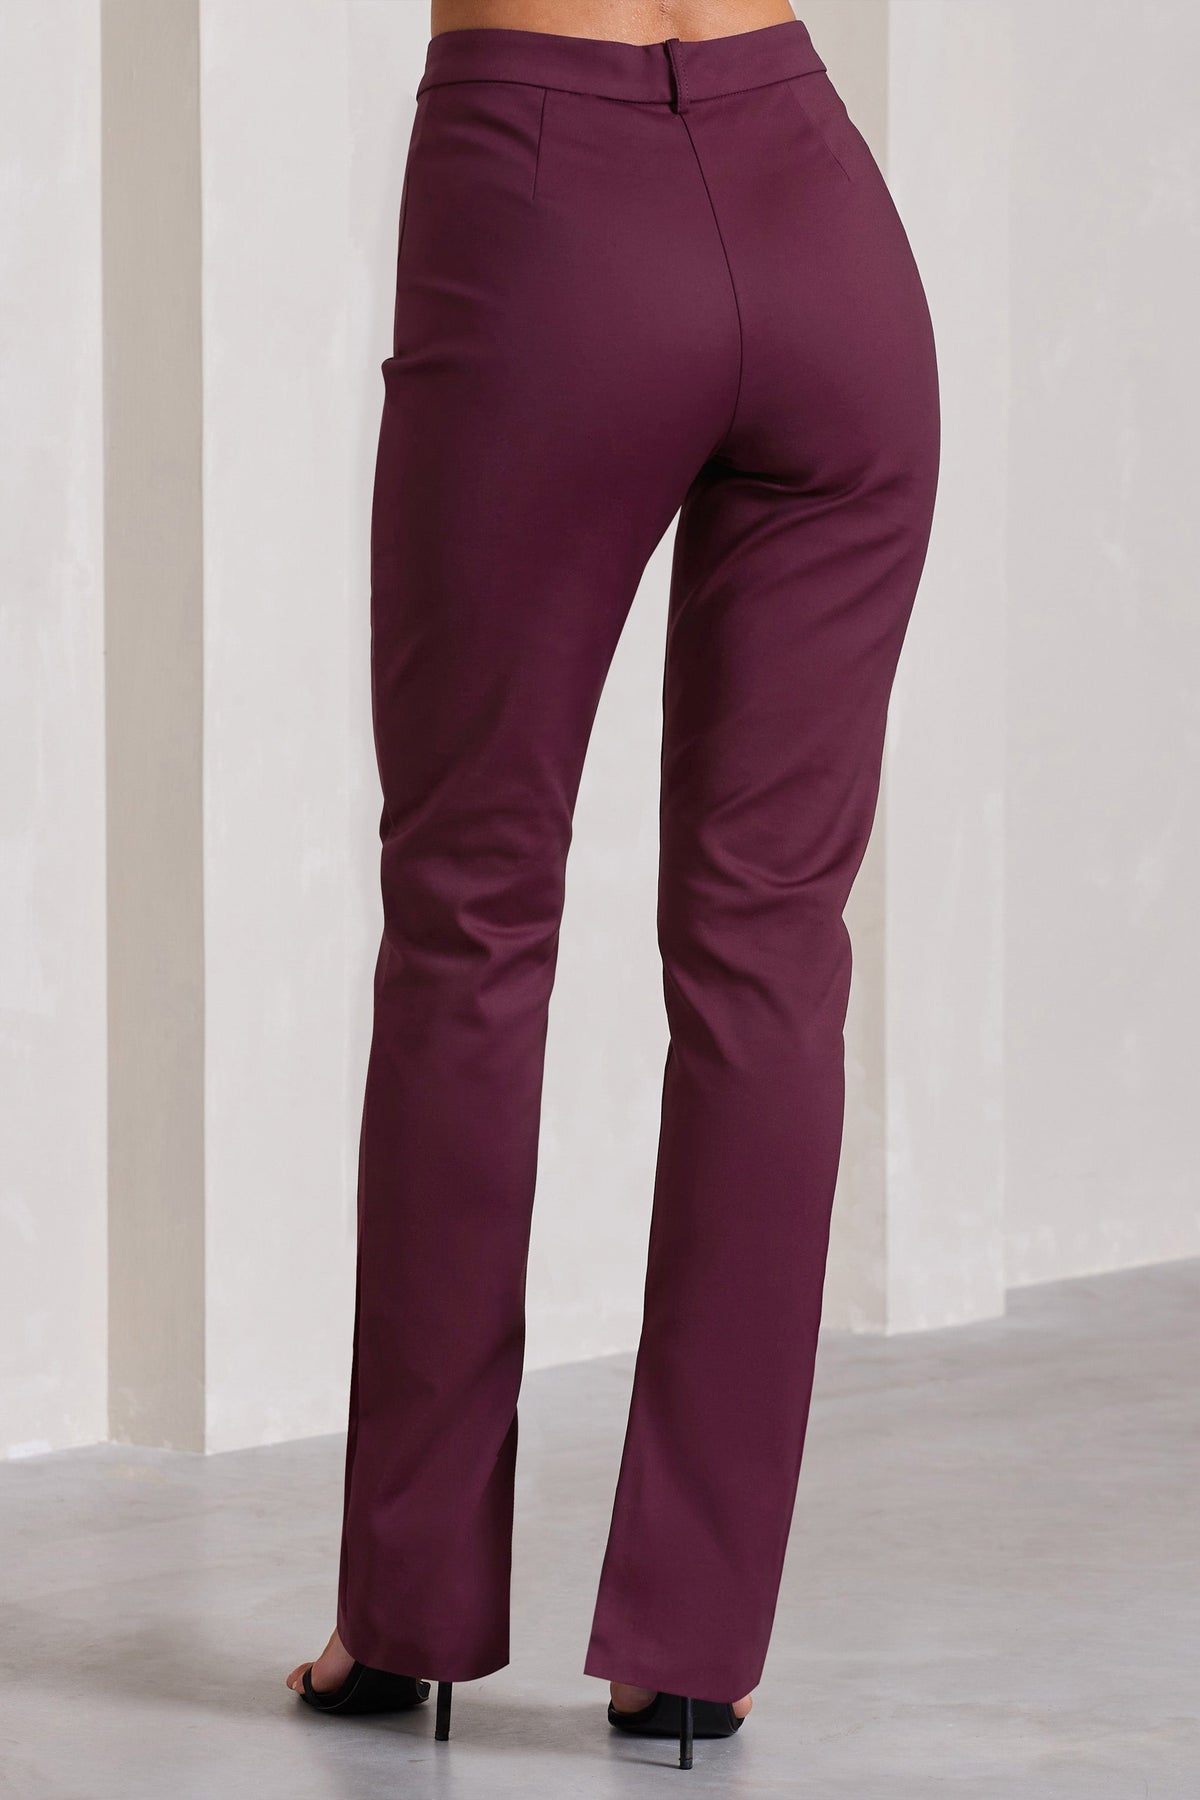 iThinksew - Patterns and More - High Waist Tailored Trousers (A4, US  Letter, A0) (EU 34 - 50, US 4-20, UK 6-22)